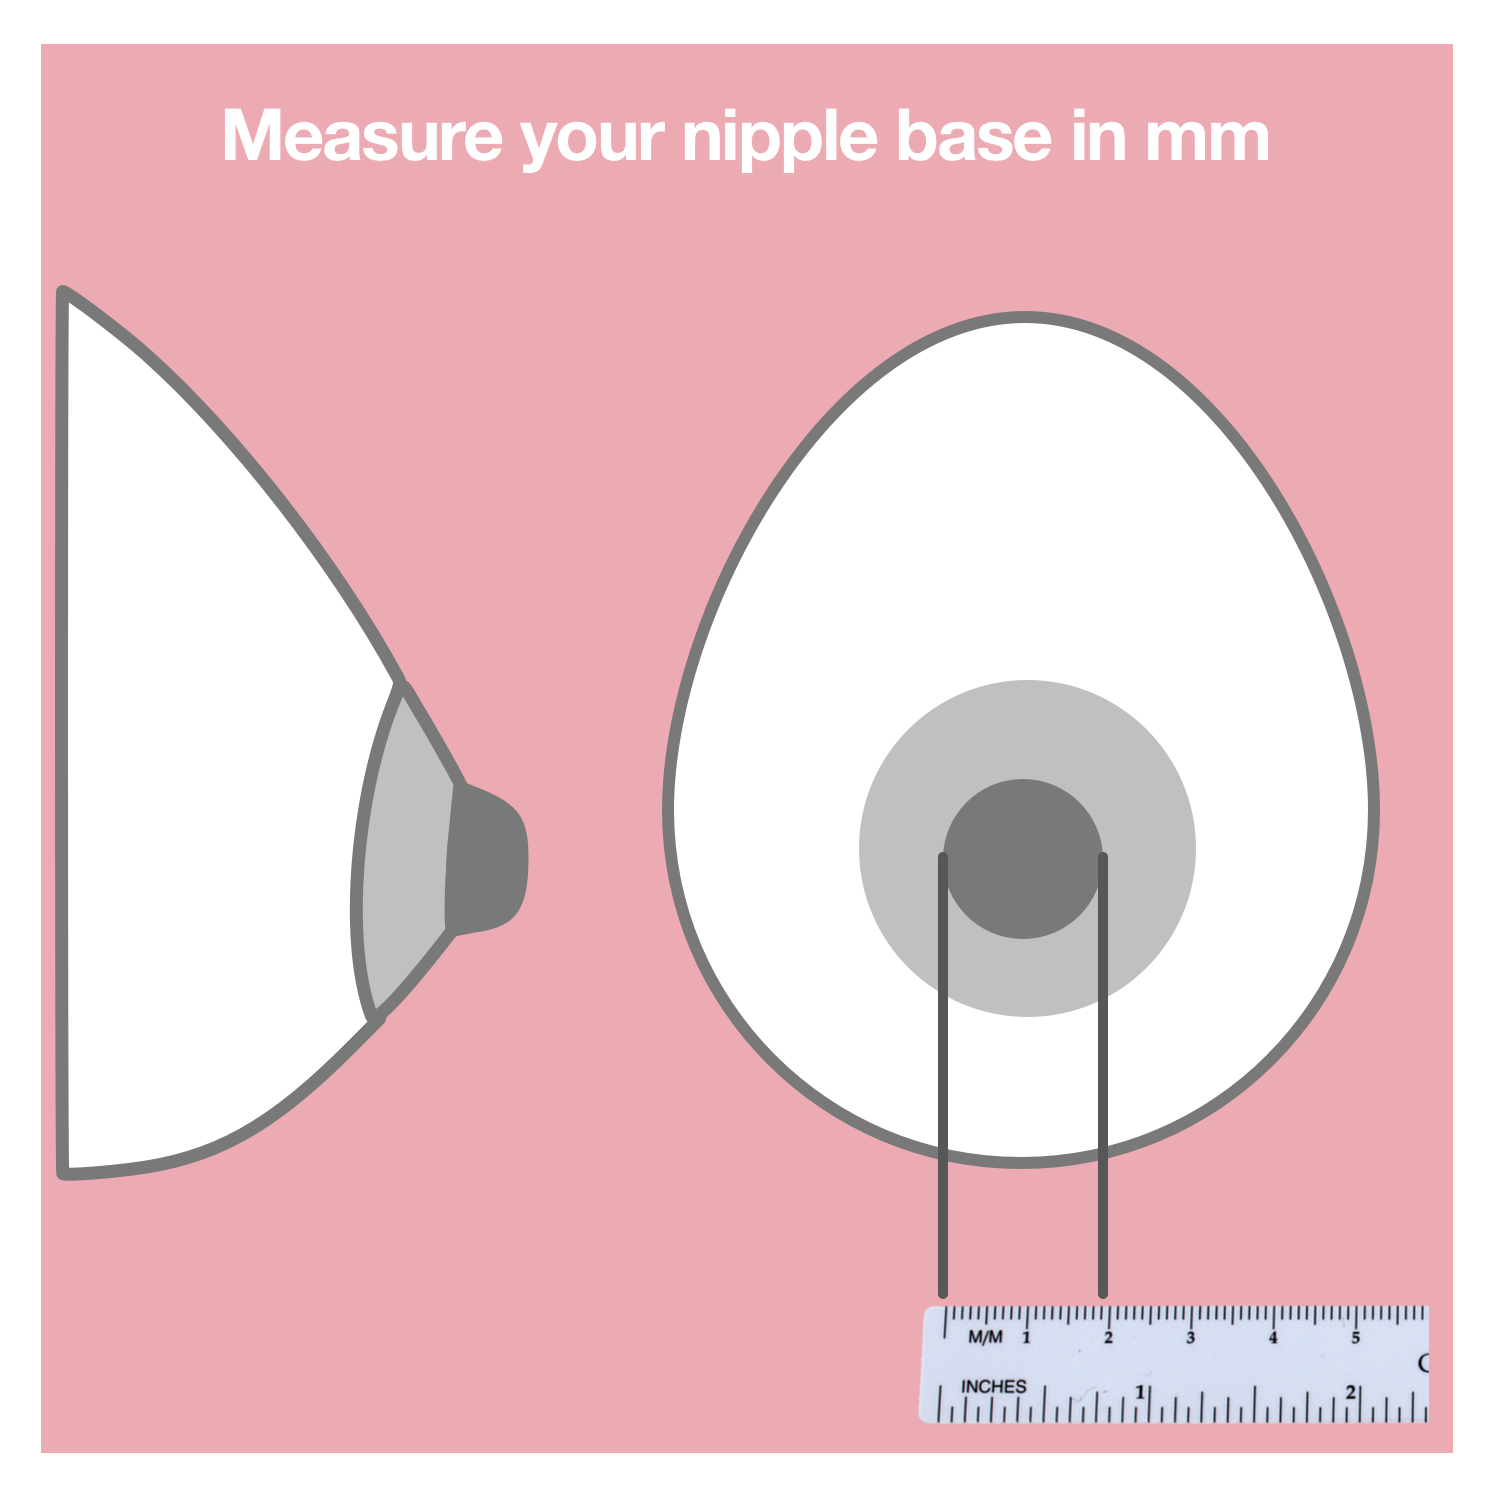 Nipple shields: when and how to use them